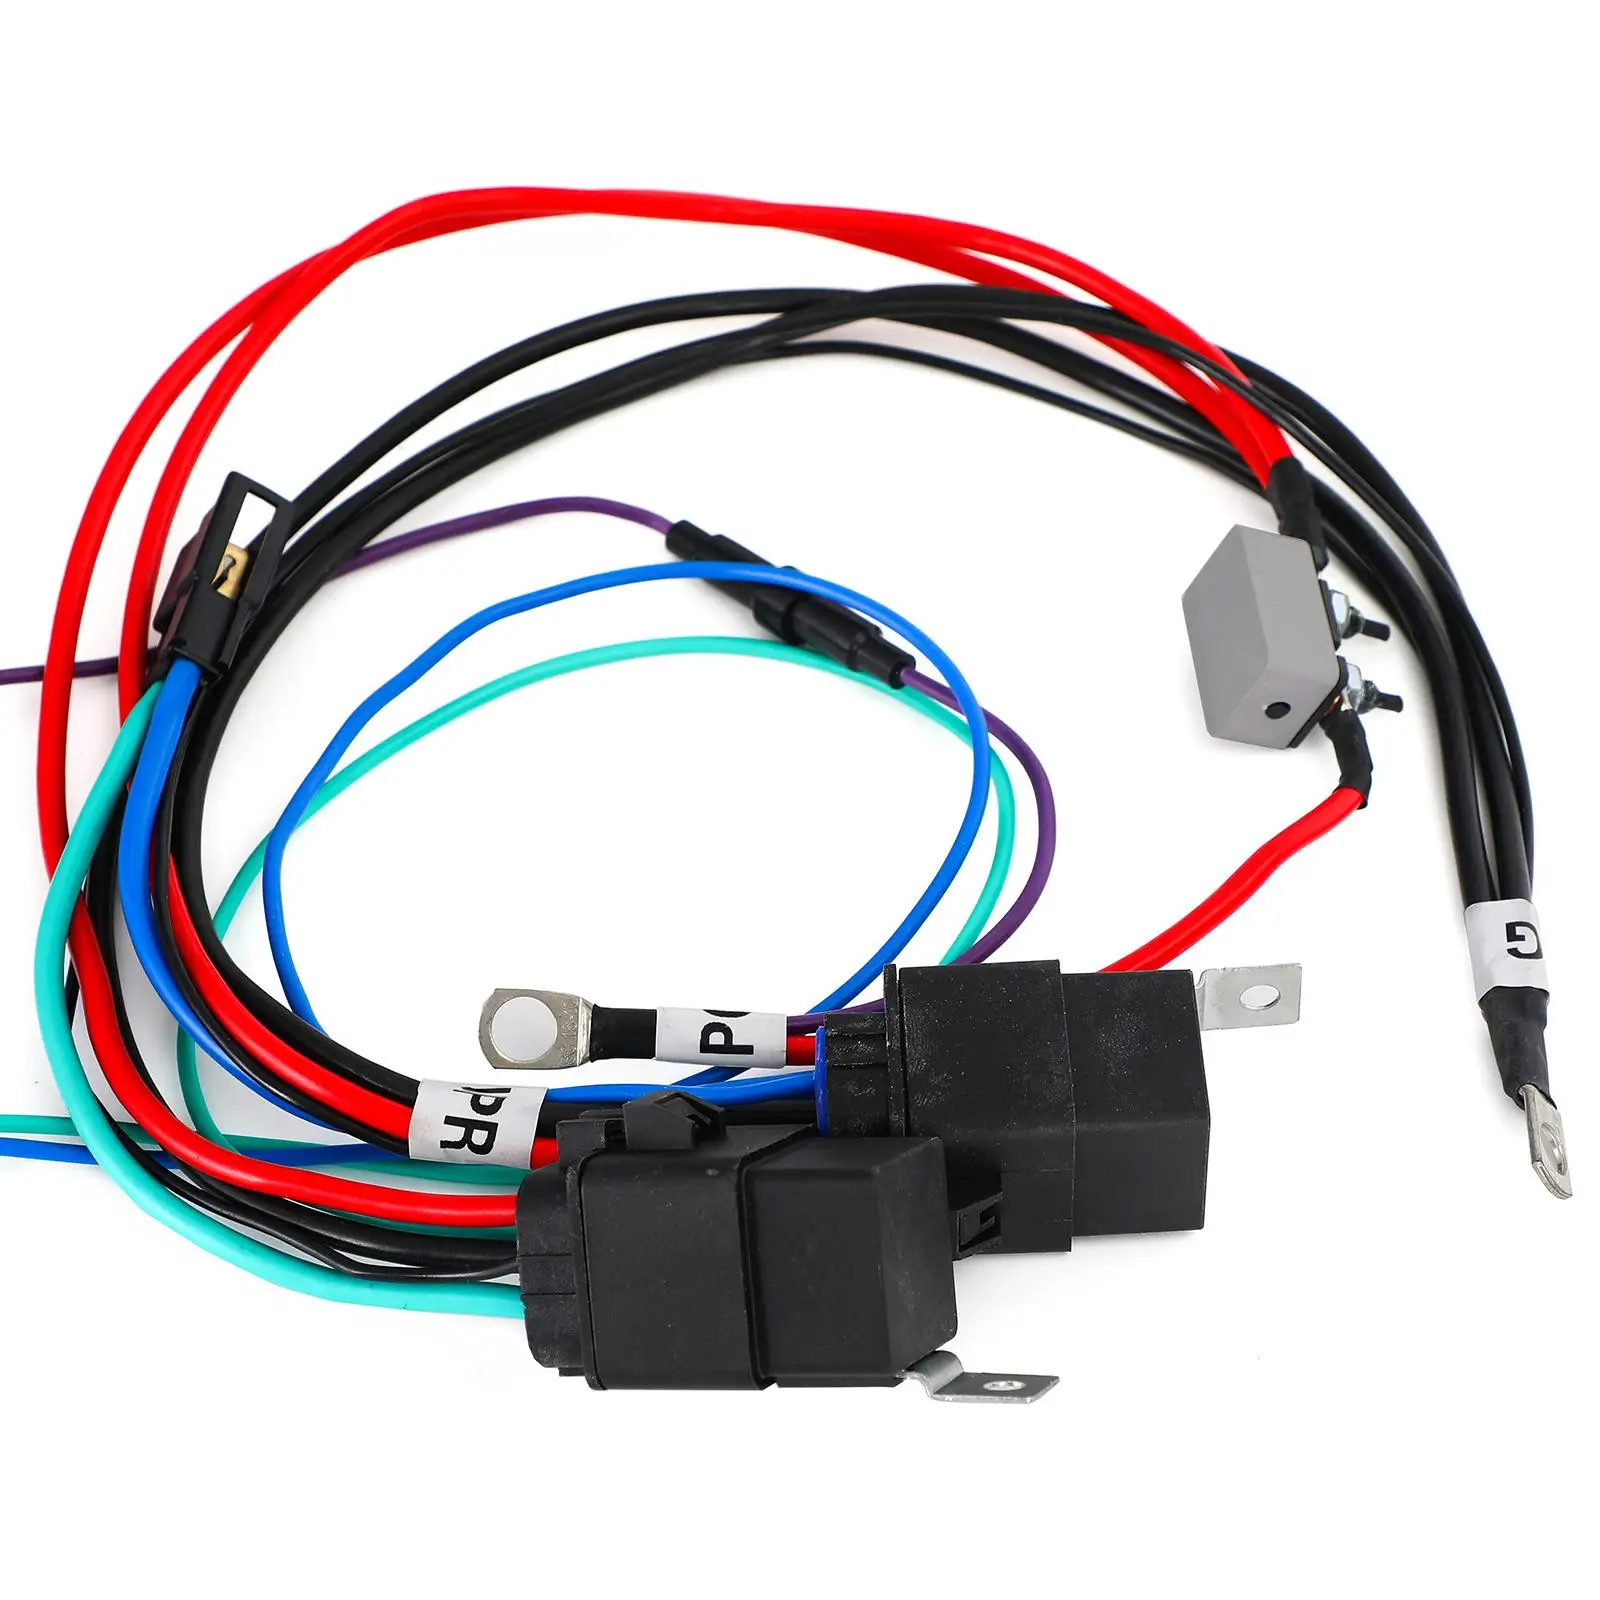 Wiring Cable Harness Kit 7014G Easy Installation Directly Replace for Cmc/Marine Tilt Trim Unit Jack Plate Accessory